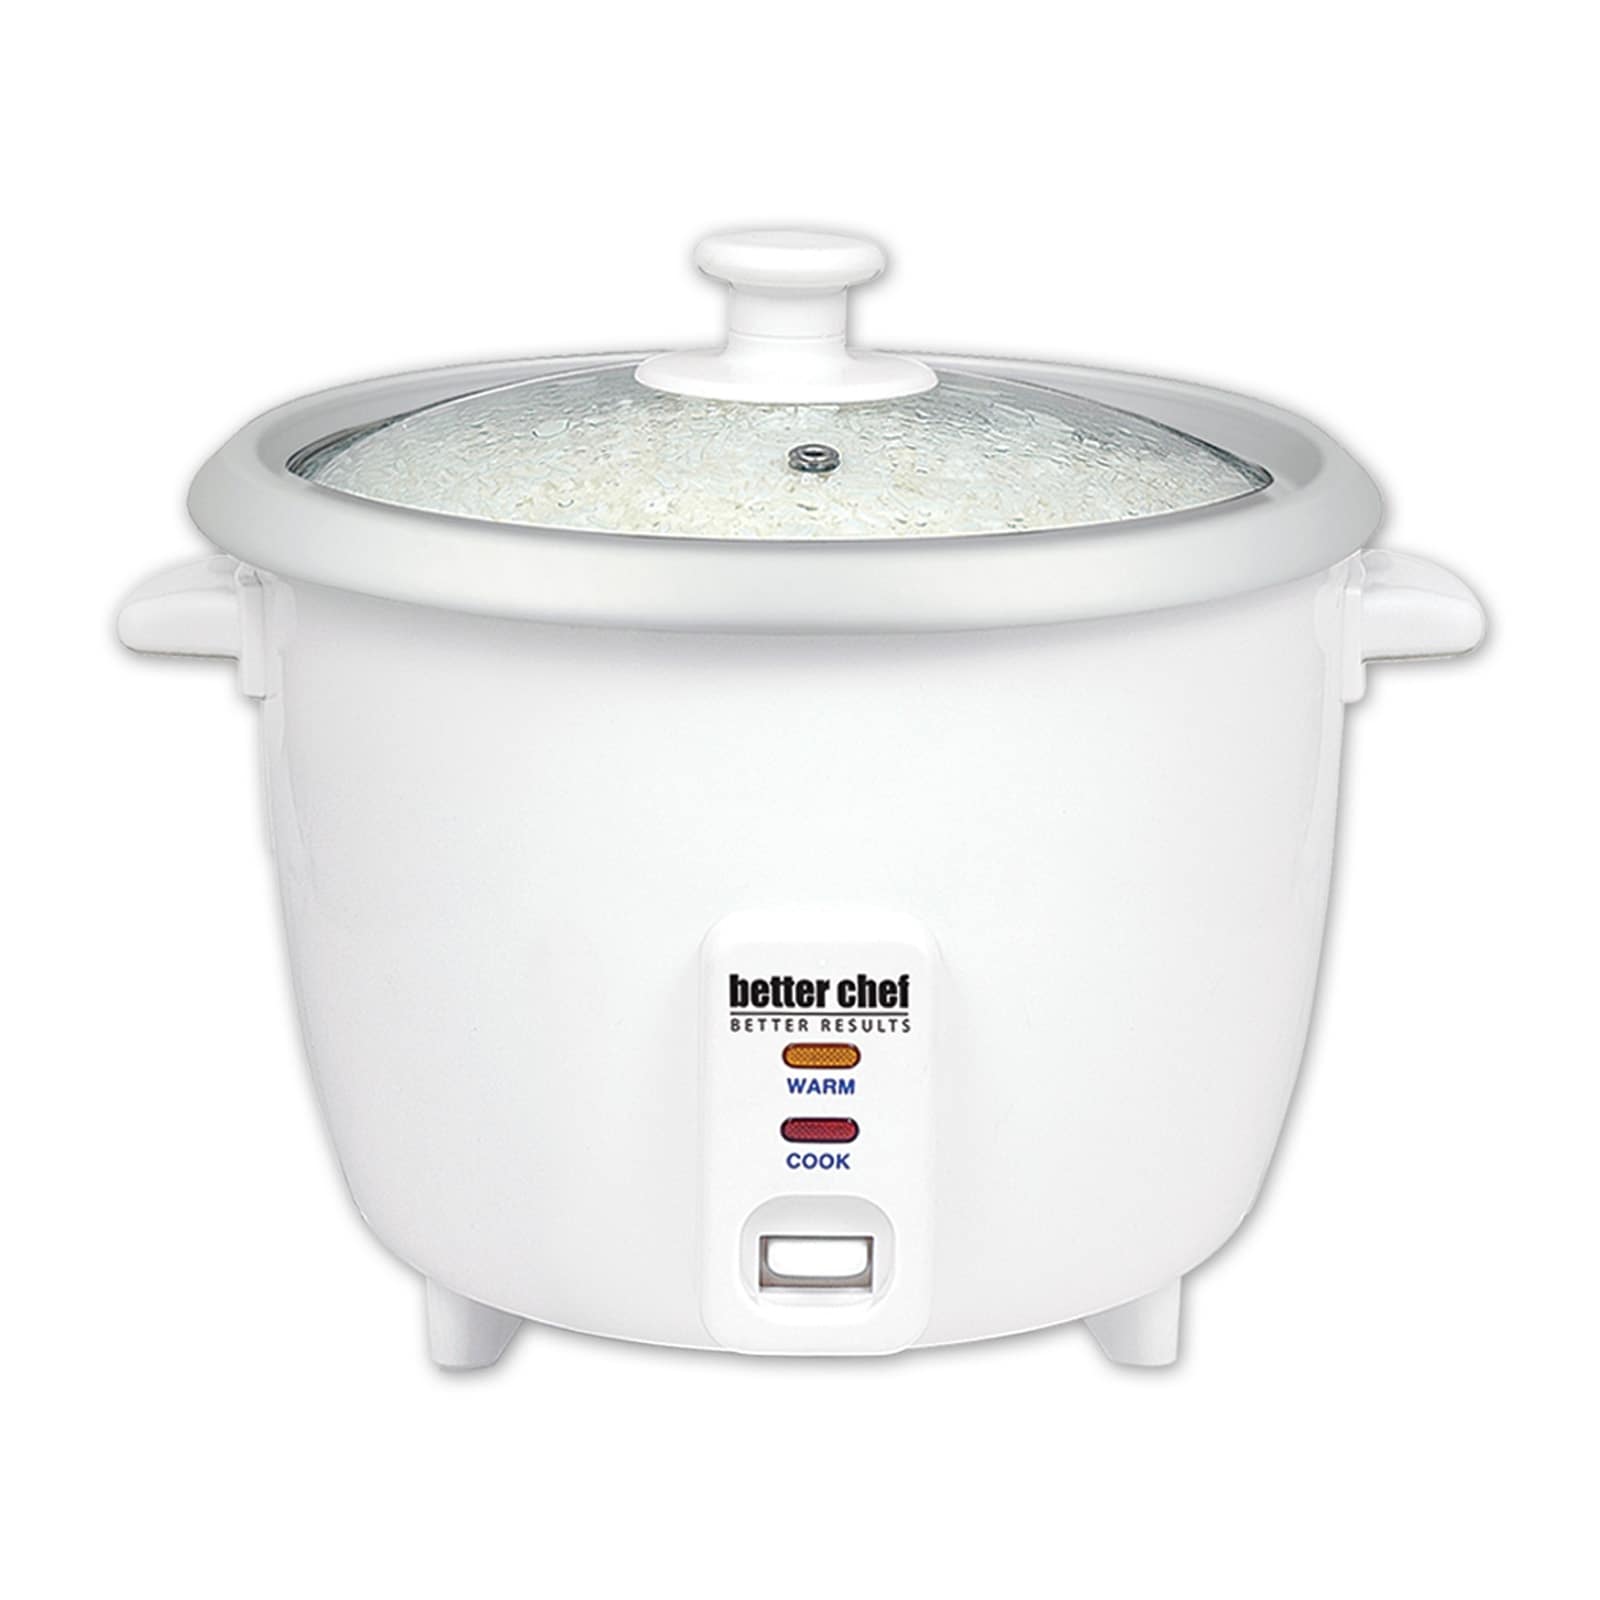 https://ak1.ostkcdn.com/images/products/is/images/direct/c73c75a44101006258b9a59c4f01a5532f718f9e/Better-Chef-IM-400-Automatic-Rice-Cooker.jpg